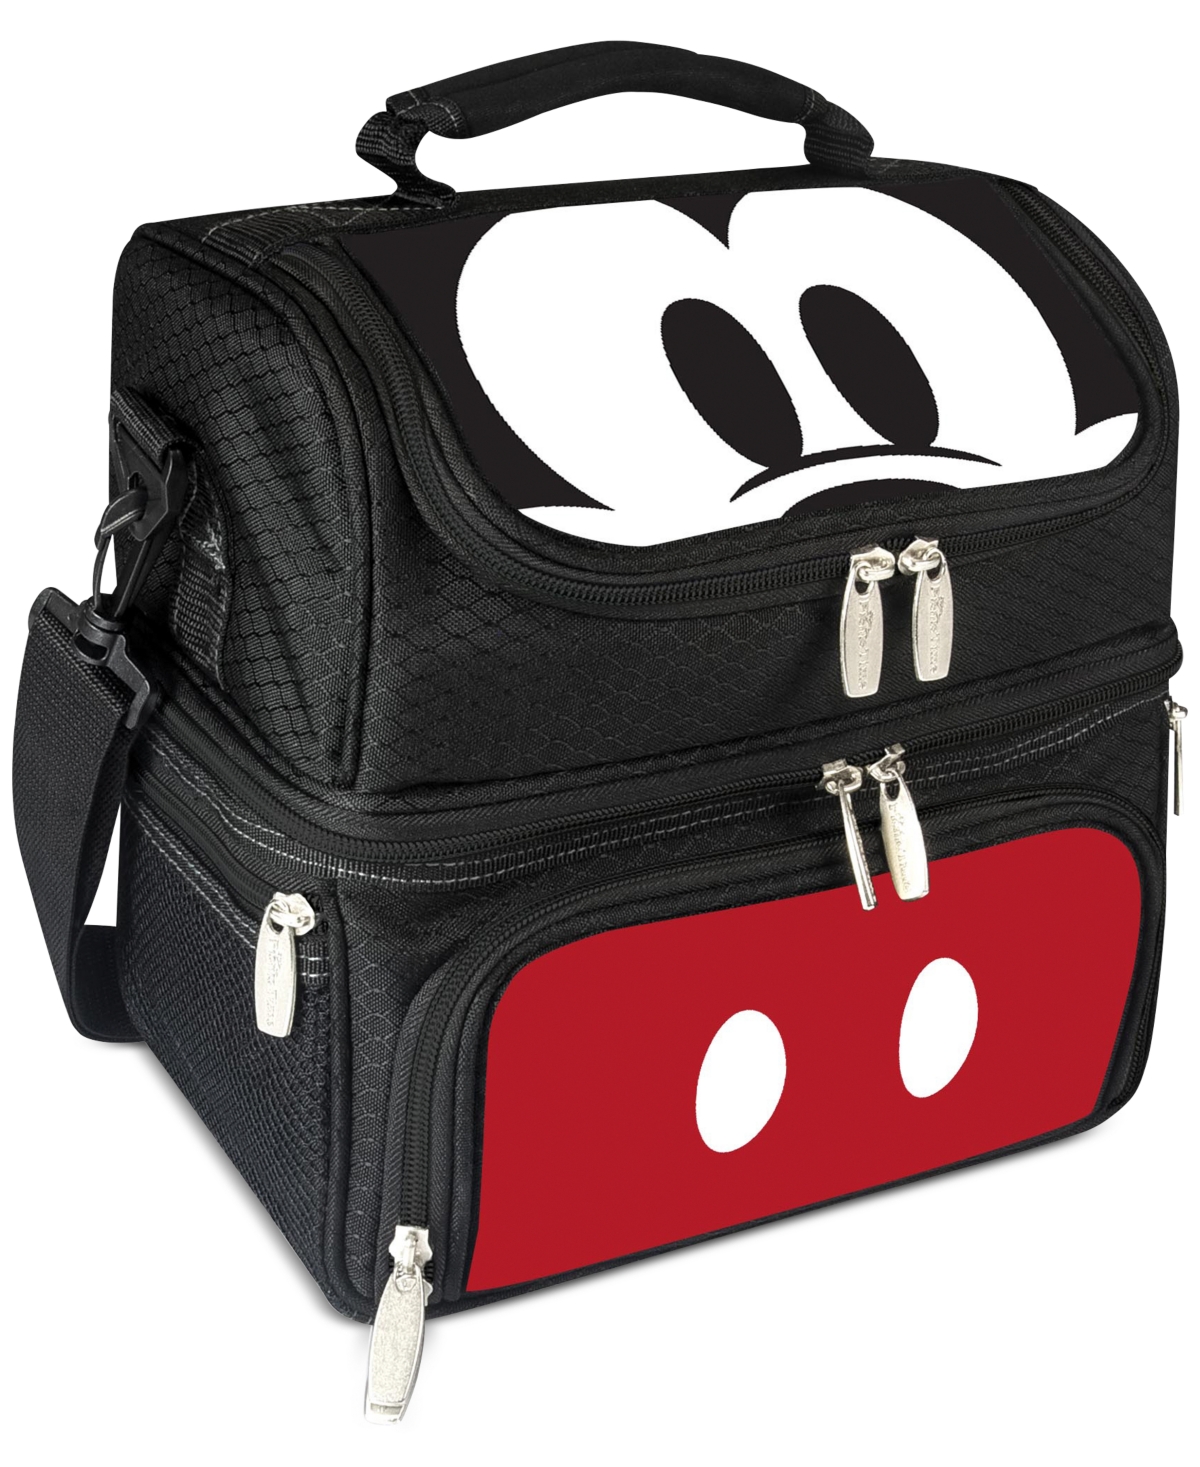 Disney 's Mickey Mouse Pranzo Lunch Tote In Black